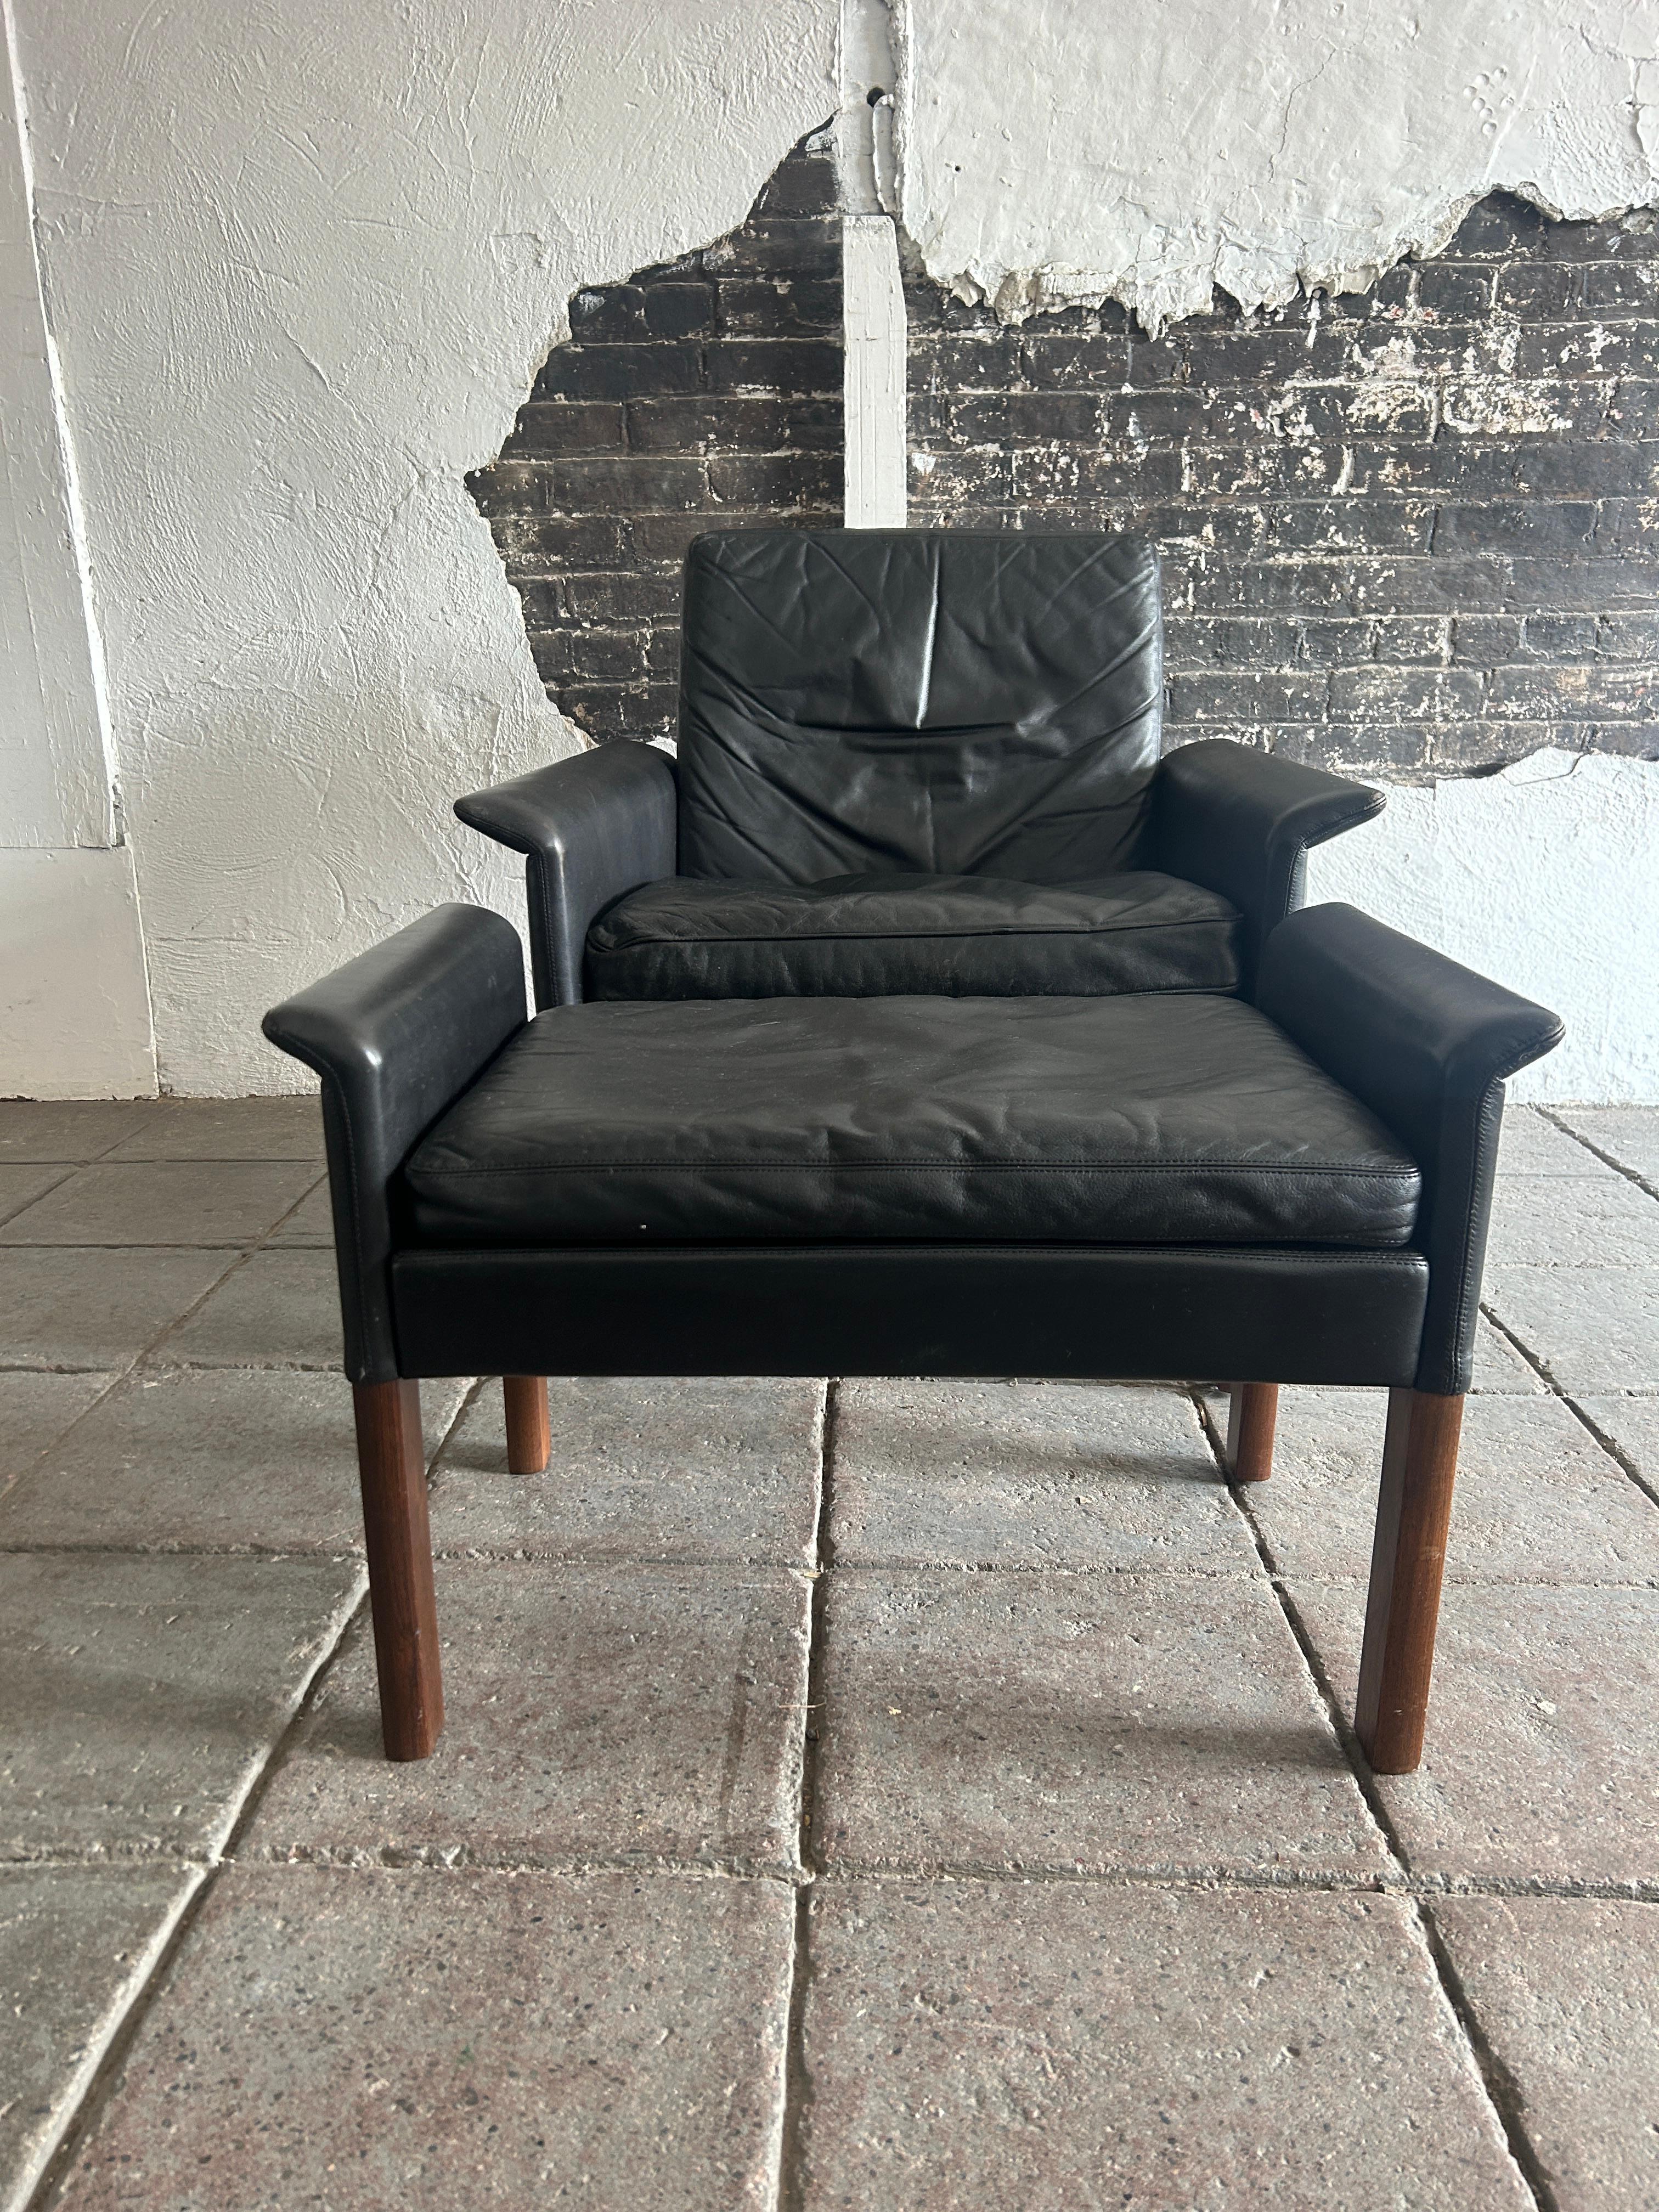 Beautiful Scandinavian Modern black leather lounge chair with ottoman designed by Hans Olsen. All original soft black leather down filled cushions. Sofa is in good vintage condition all straps are good with solid rosewood legs. Labeled CS Mobler